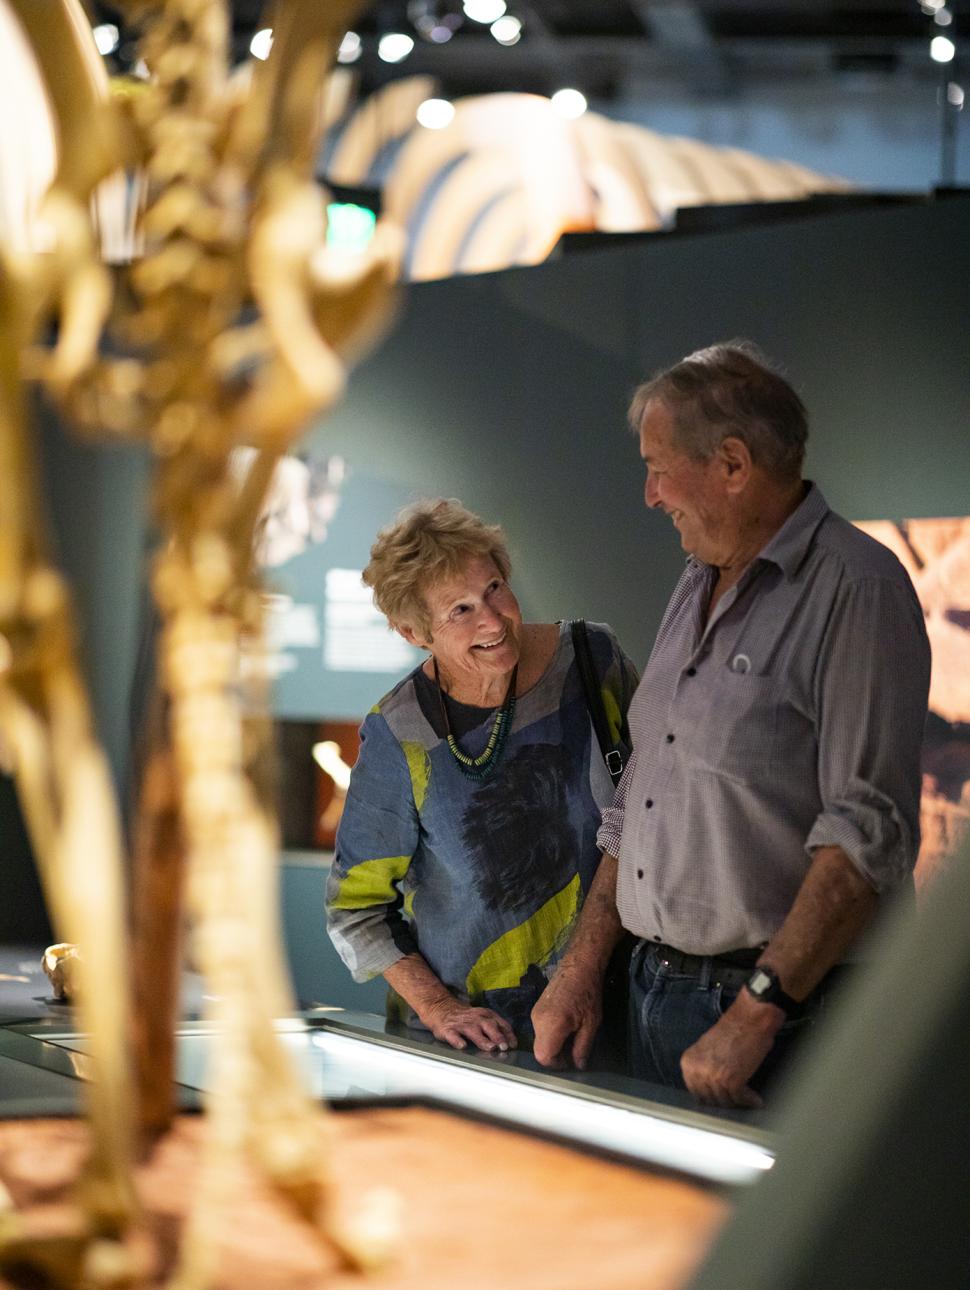 Two senior individuals studying a skeleton fossil together, with the fossil in the foreground and a gallery setting in the background